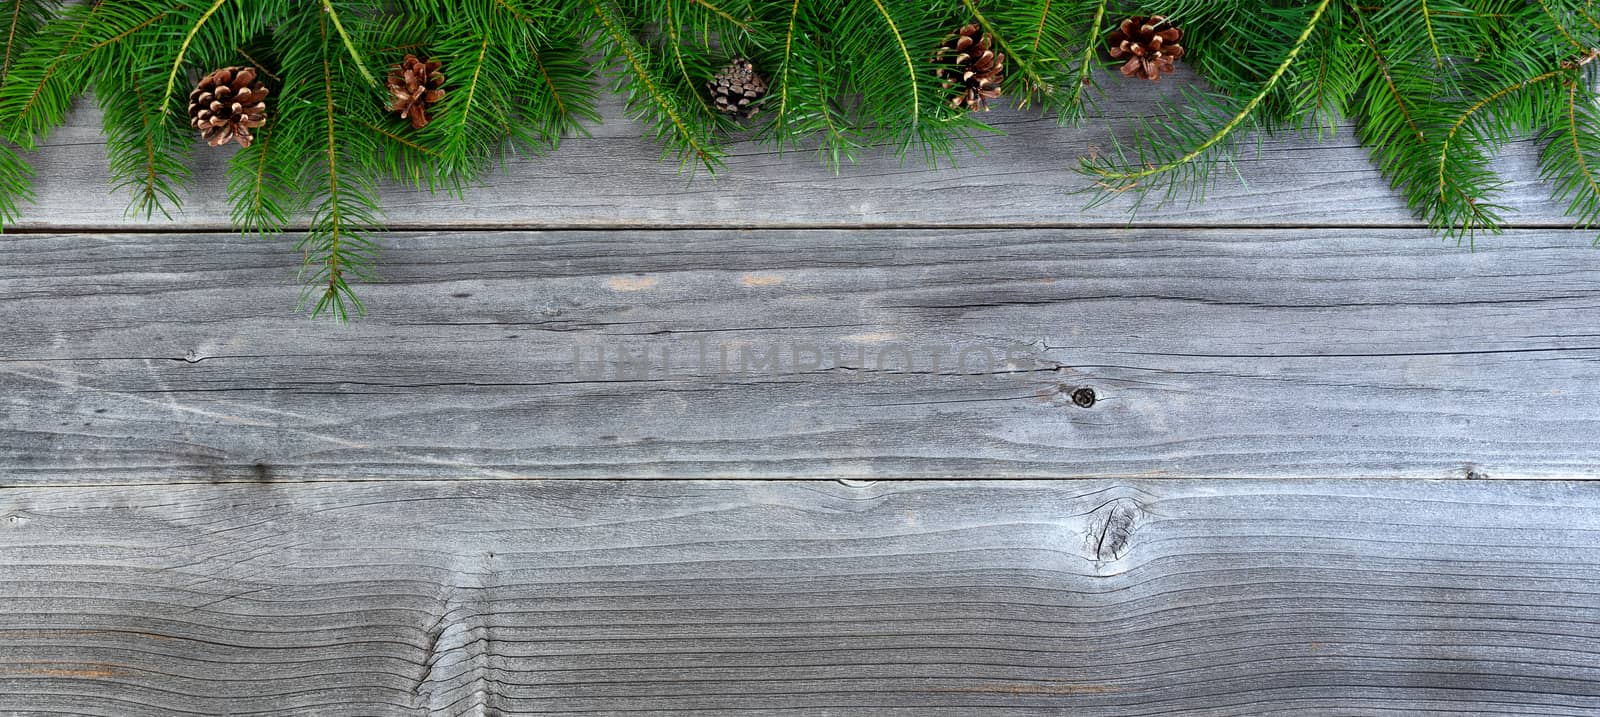 Overhead view of real Christmas fir tree branches on weathered w by tab1962